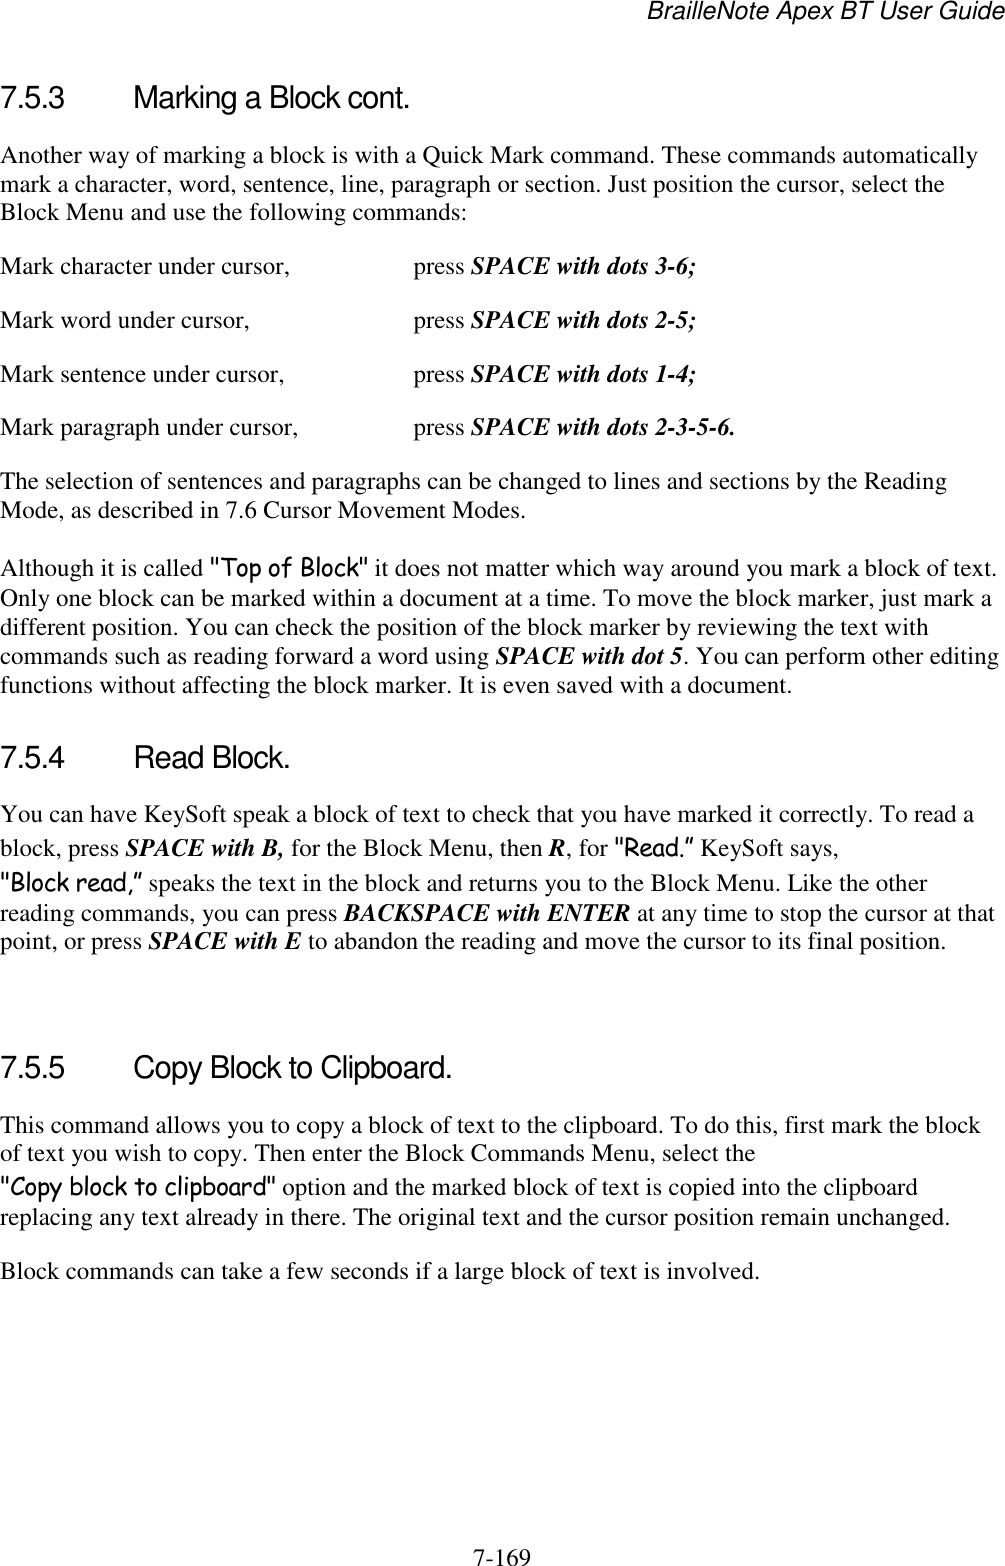 BrailleNote Apex BT User Guide   7-169   7.5.3  Marking a Block cont. Another way of marking a block is with a Quick Mark command. These commands automatically mark a character, word, sentence, line, paragraph or section. Just position the cursor, select the Block Menu and use the following commands: Mark character under cursor,  press SPACE with dots 3-6; Mark word under cursor,  press SPACE with dots 2-5; Mark sentence under cursor,  press SPACE with dots 1-4; Mark paragraph under cursor,  press SPACE with dots 2-3-5-6. The selection of sentences and paragraphs can be changed to lines and sections by the Reading Mode, as described in 7.6 Cursor Movement Modes. Although it is called &quot;Top of Block&quot; it does not matter which way around you mark a block of text. Only one block can be marked within a document at a time. To move the block marker, just mark a different position. You can check the position of the block marker by reviewing the text with commands such as reading forward a word using SPACE with dot 5. You can perform other editing functions without affecting the block marker. It is even saved with a document.  7.5.4  Read Block. You can have KeySoft speak a block of text to check that you have marked it correctly. To read a block, press SPACE with B, for the Block Menu, then R, for &quot;Read.” KeySoft says, &quot;Block read,” speaks the text in the block and returns you to the Block Menu. Like the other reading commands, you can press BACKSPACE with ENTER at any time to stop the cursor at that point, or press SPACE with E to abandon the reading and move the cursor to its final position.   7.5.5  Copy Block to Clipboard. This command allows you to copy a block of text to the clipboard. To do this, first mark the block of text you wish to copy. Then enter the Block Commands Menu, select the &quot;Copy block to clipboard&quot; option and the marked block of text is copied into the clipboard replacing any text already in there. The original text and the cursor position remain unchanged. Block commands can take a few seconds if a large block of text is involved.   